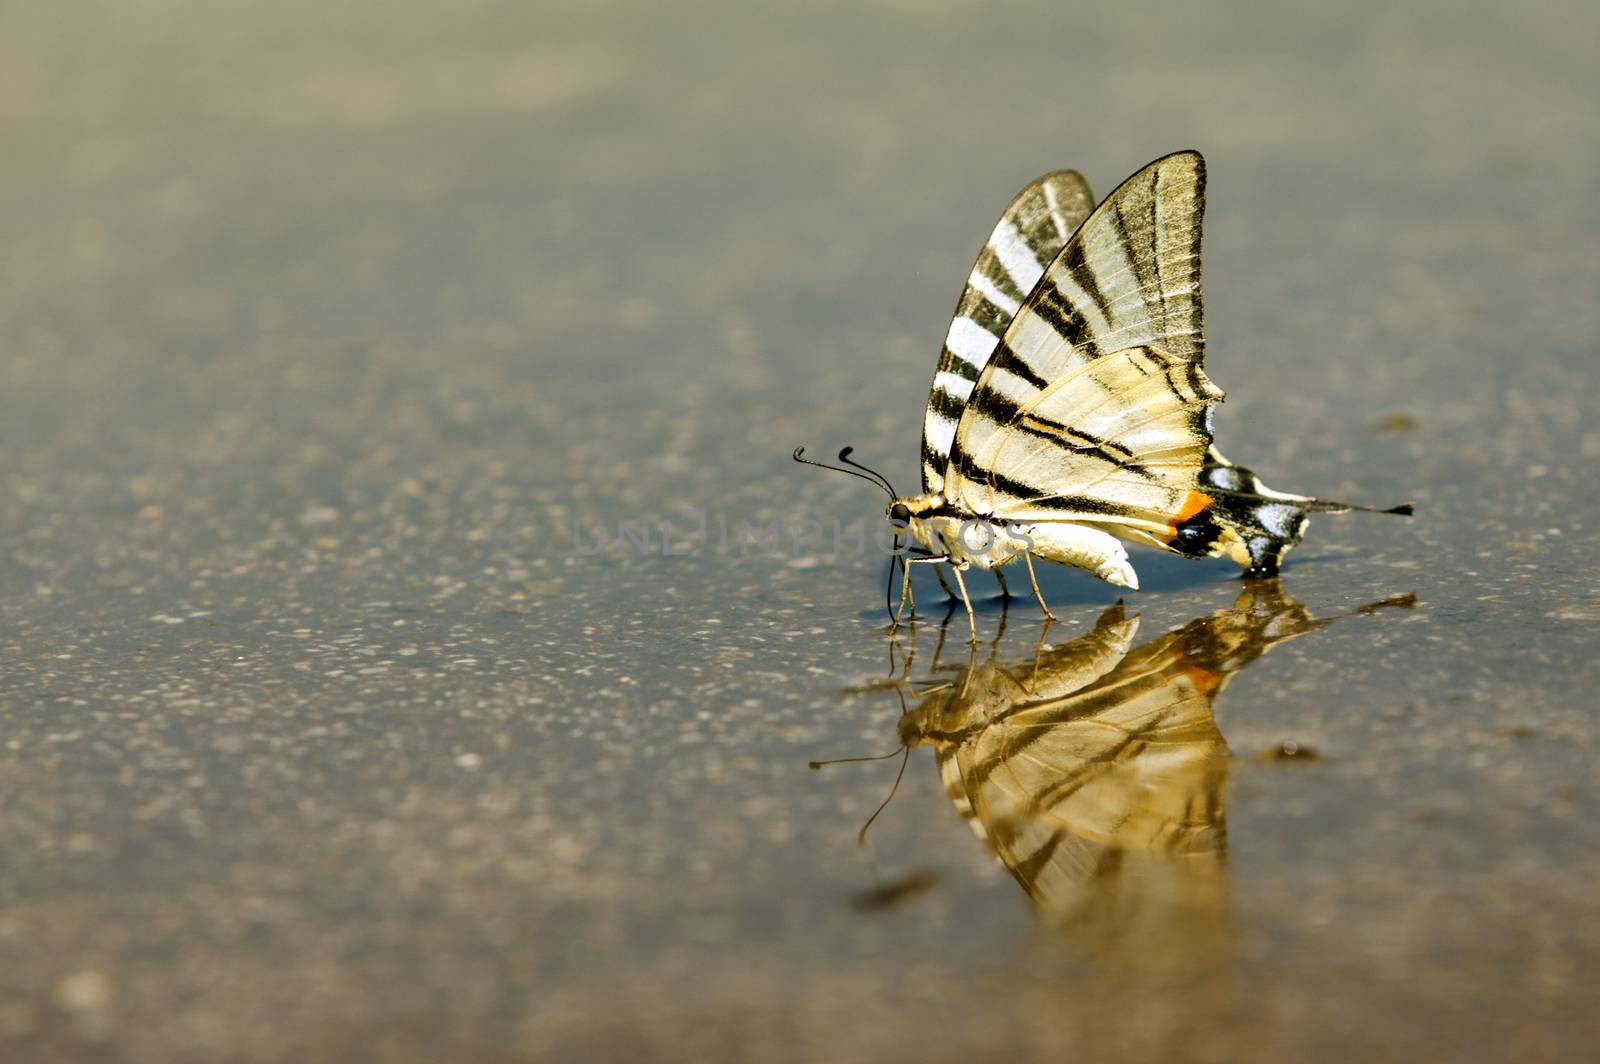 Butterflies often congregate on wet surface to partake in "puddling," drinking water and extracting minerals from damp puddles.